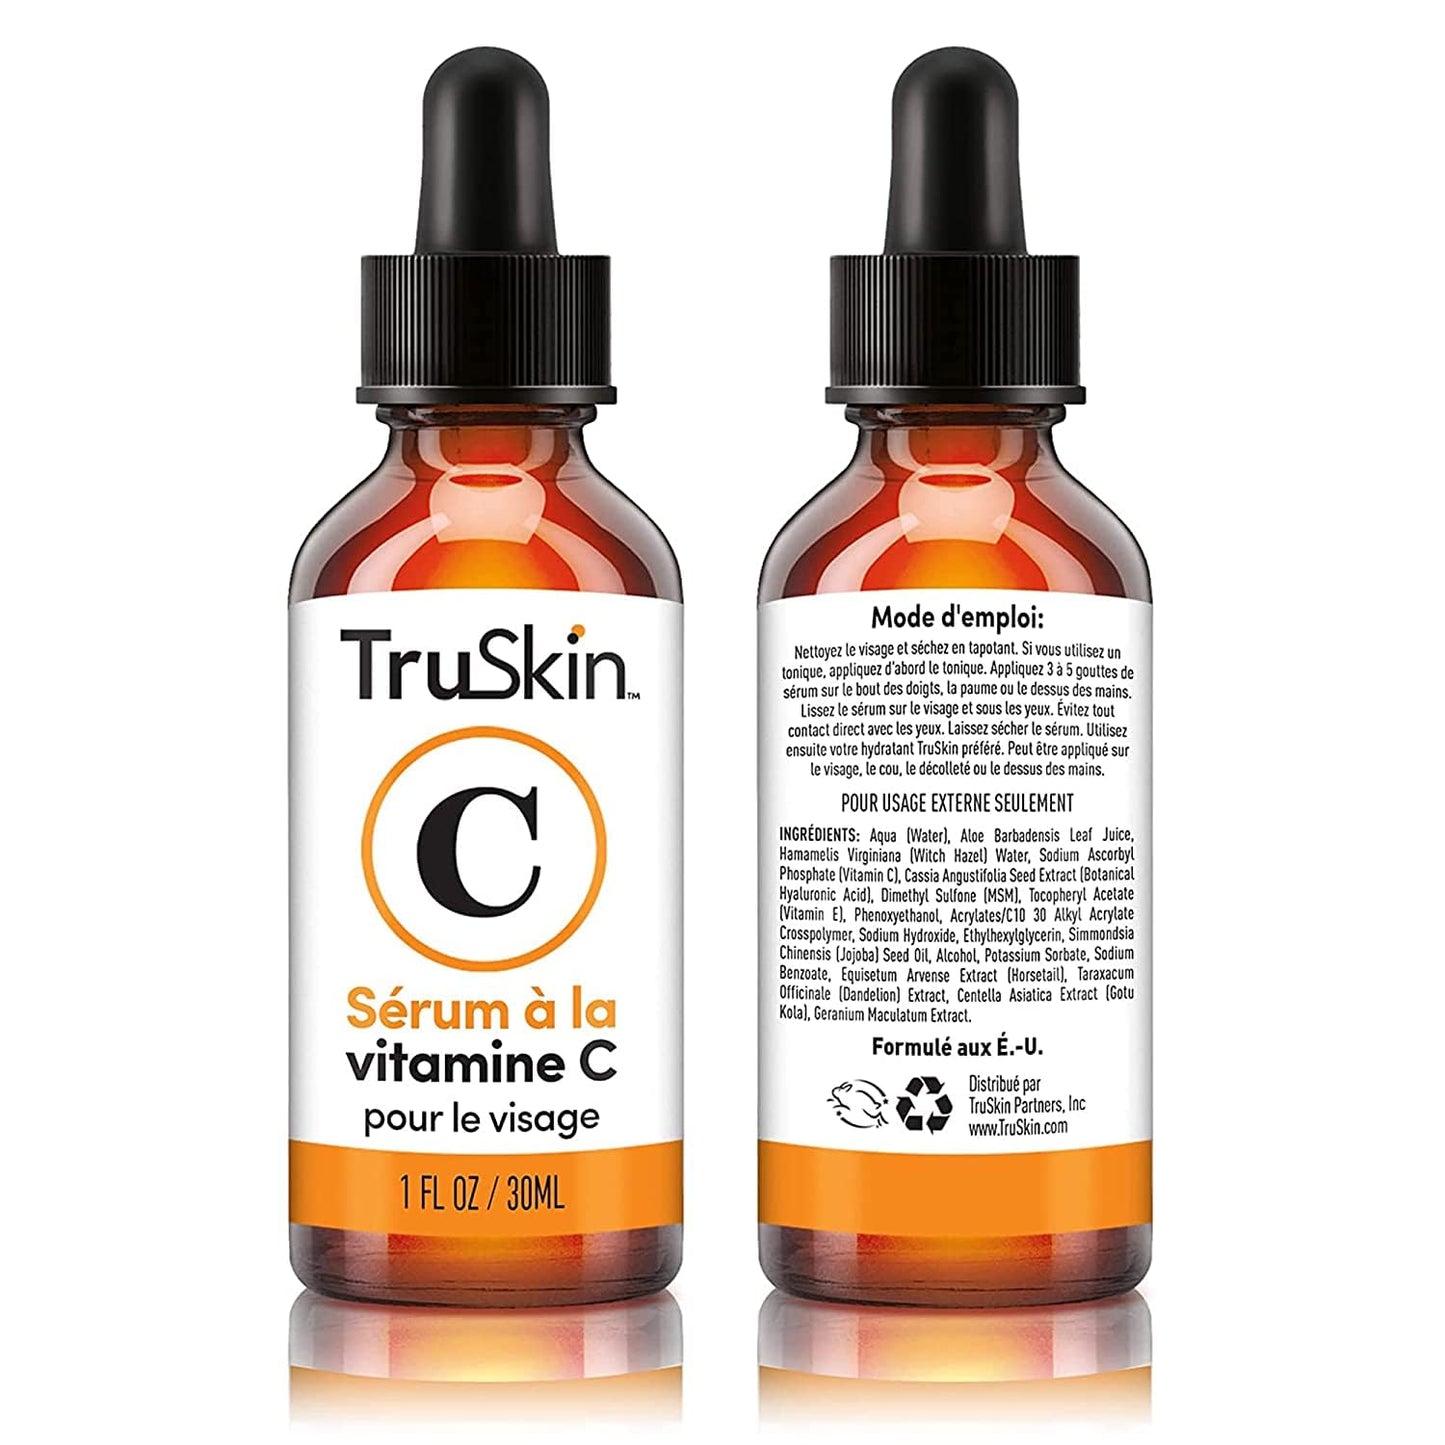 TruSkin Vitamin C Serum for Face – Brightening Anti-Aging Formula with Vitamin C, Hyaluronic Acid, and Vitamin E – Targets Dark Spots, Uneven Skin Tone, Eye Area, Fine Lines & Wrinkles – 1 Fl Oz